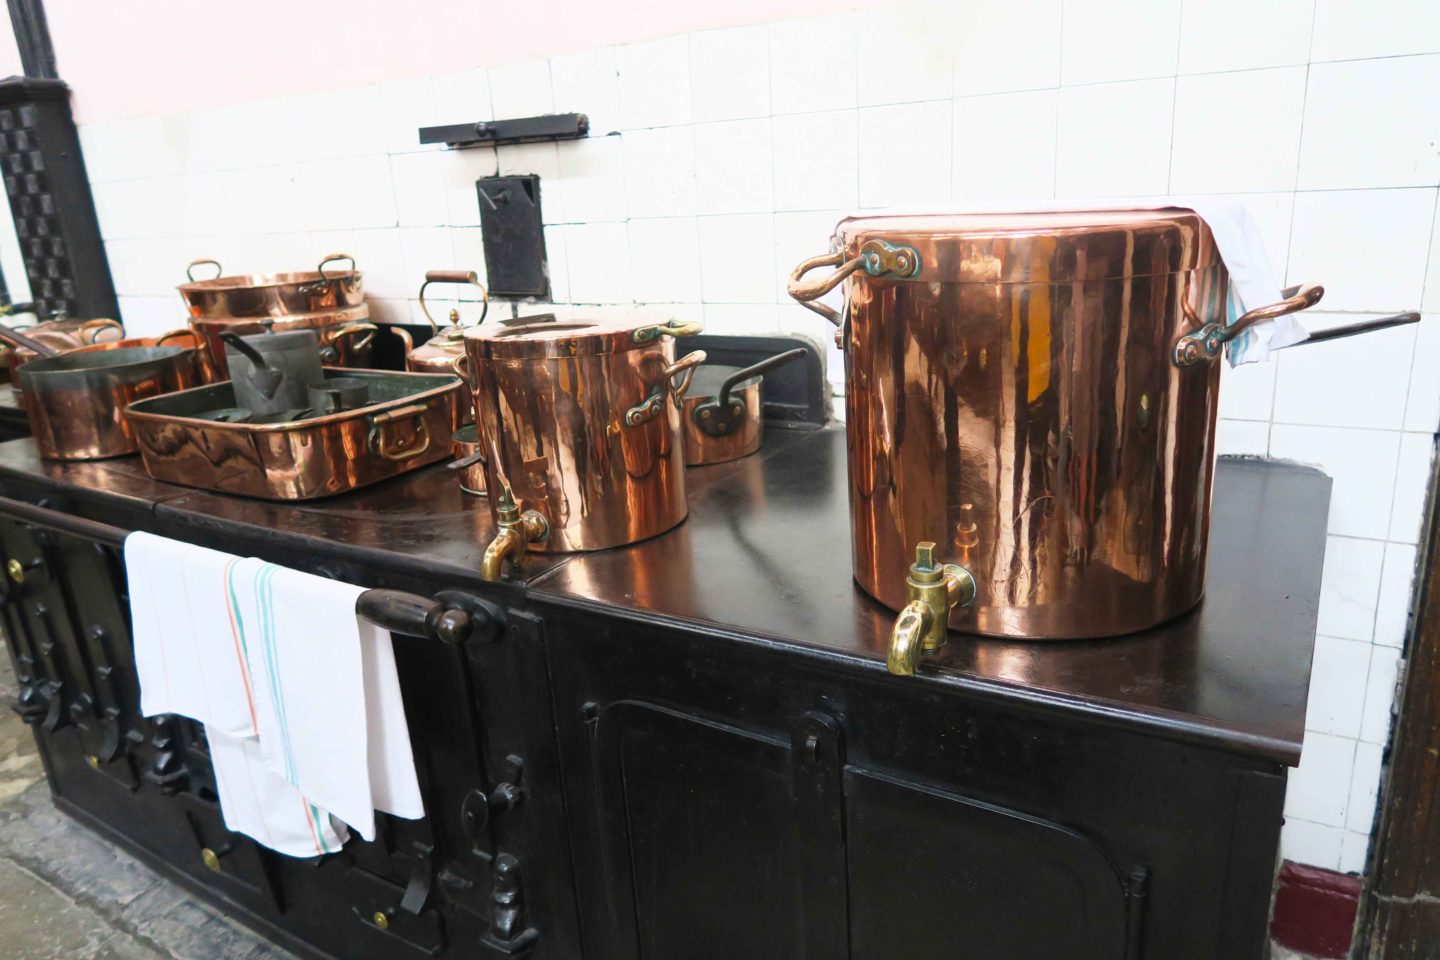 copper cooking equipment at lanhydrock house in cornwall